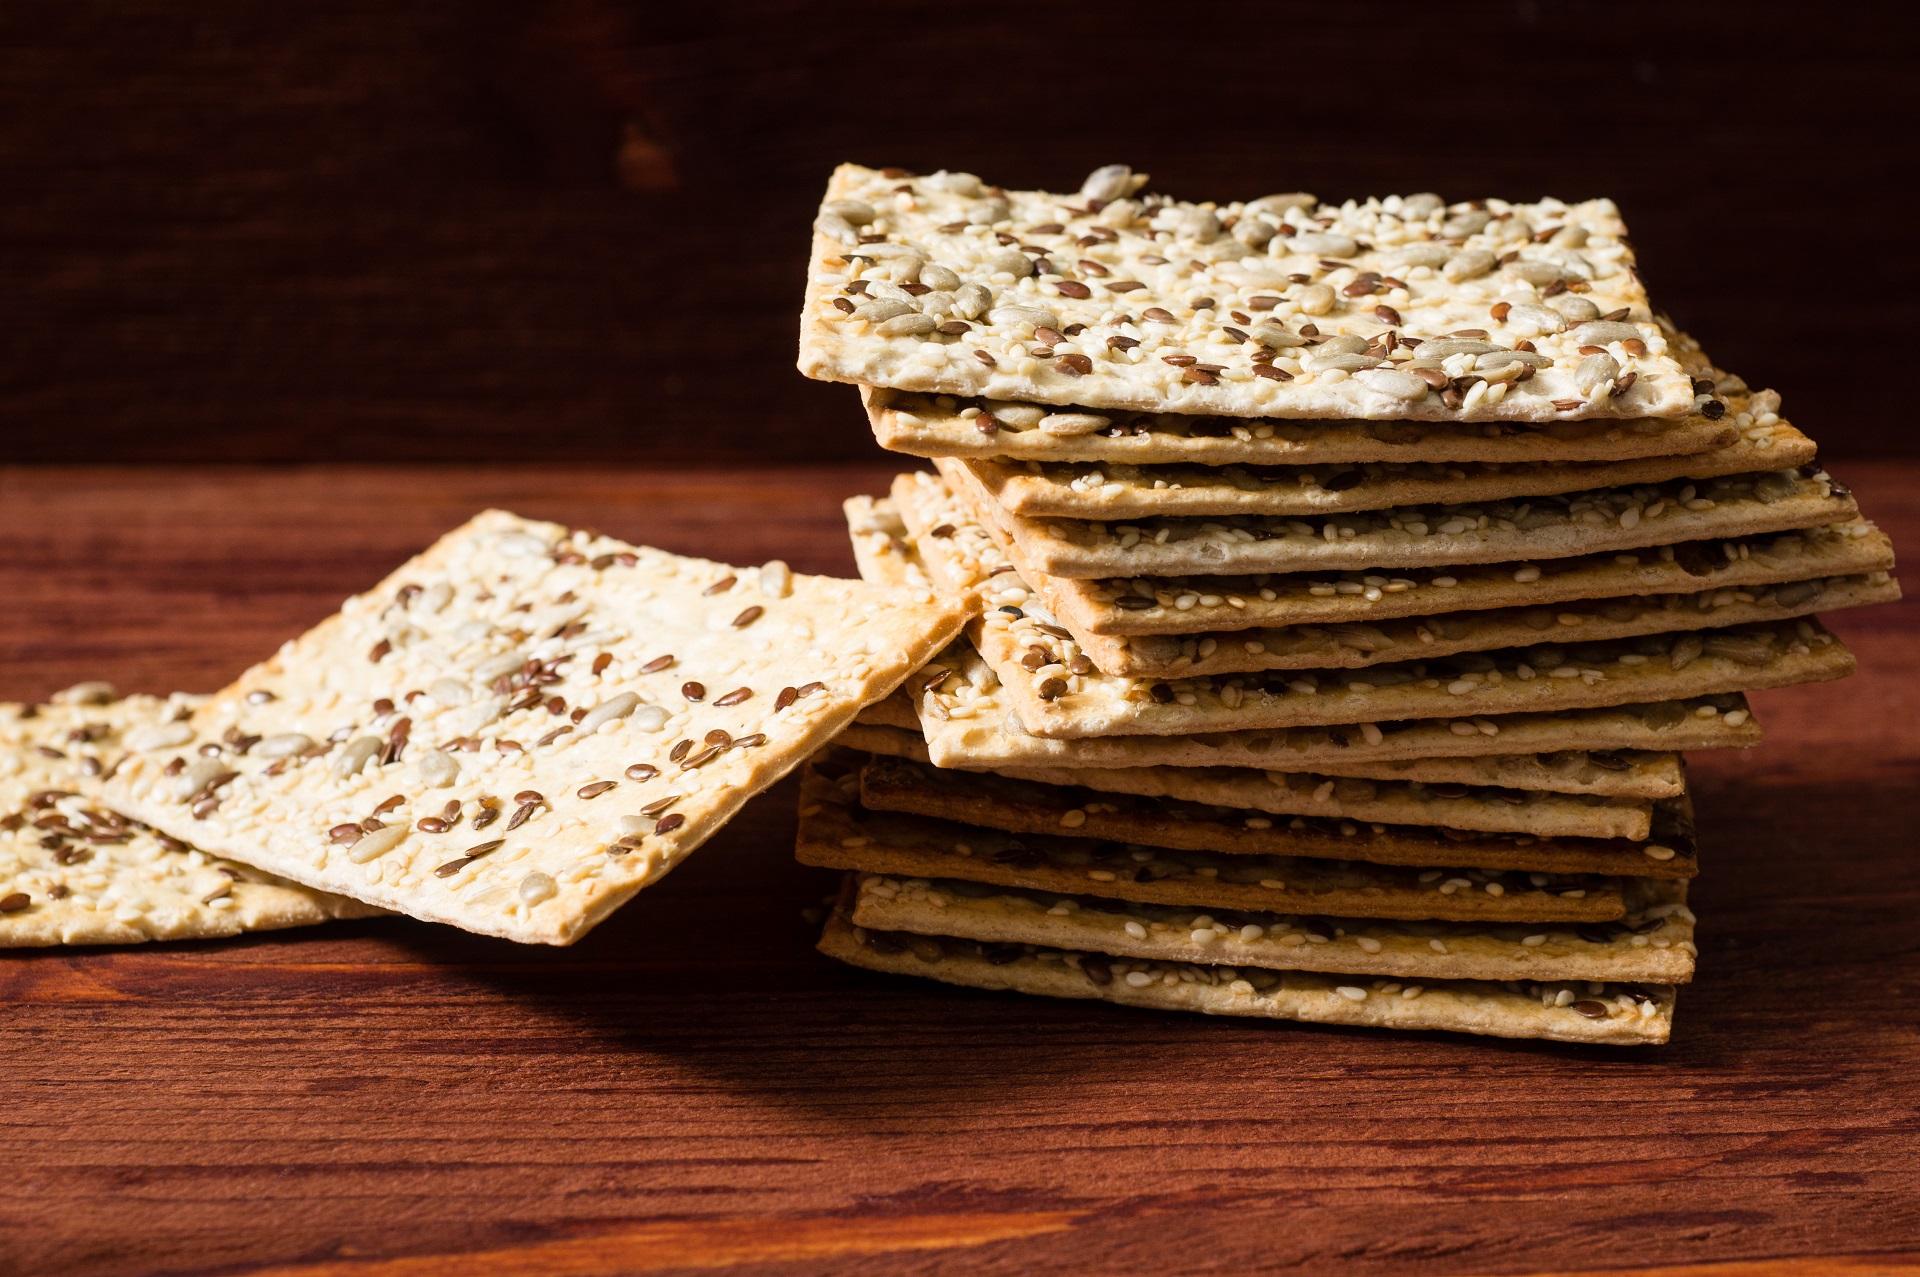 A stack of sesame seed flat bread crackers on a wooden table.